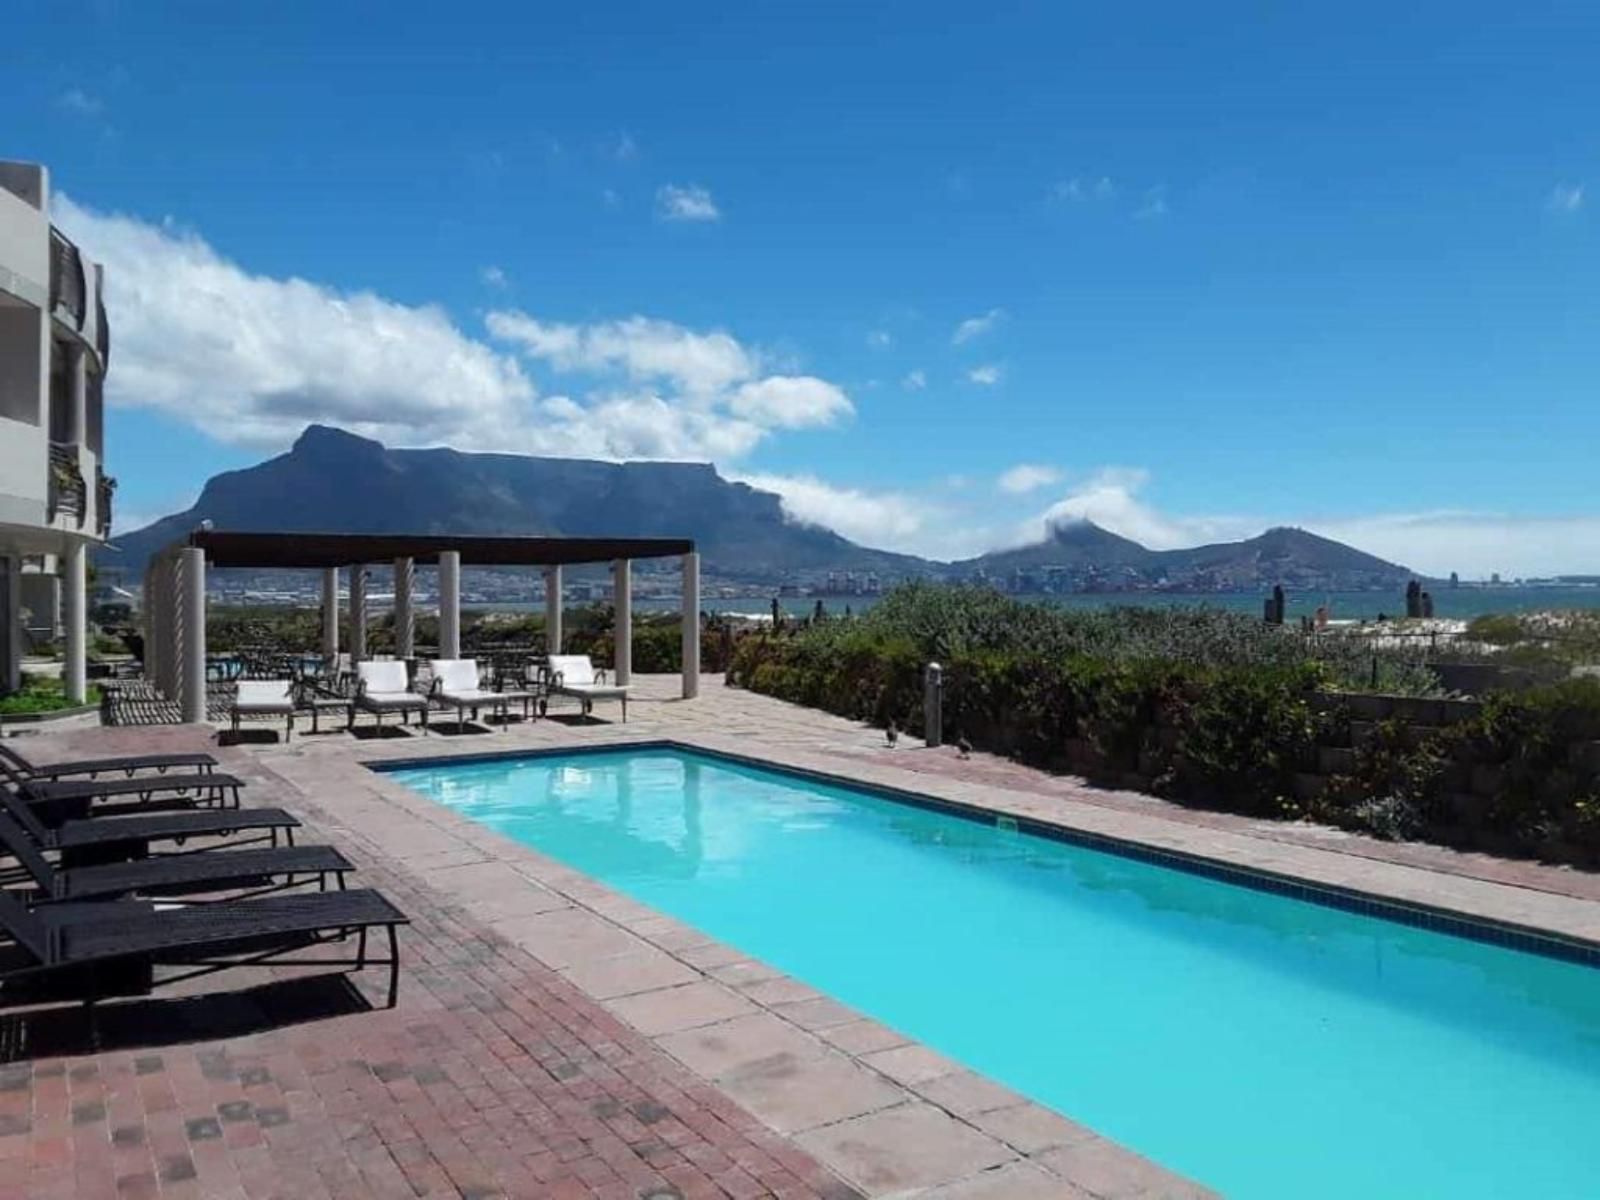 Cape Town Beachfront Apartments At Leisure Bay Lagoon Beach Cape Town Western Cape South Africa Mountain, Nature, Swimming Pool